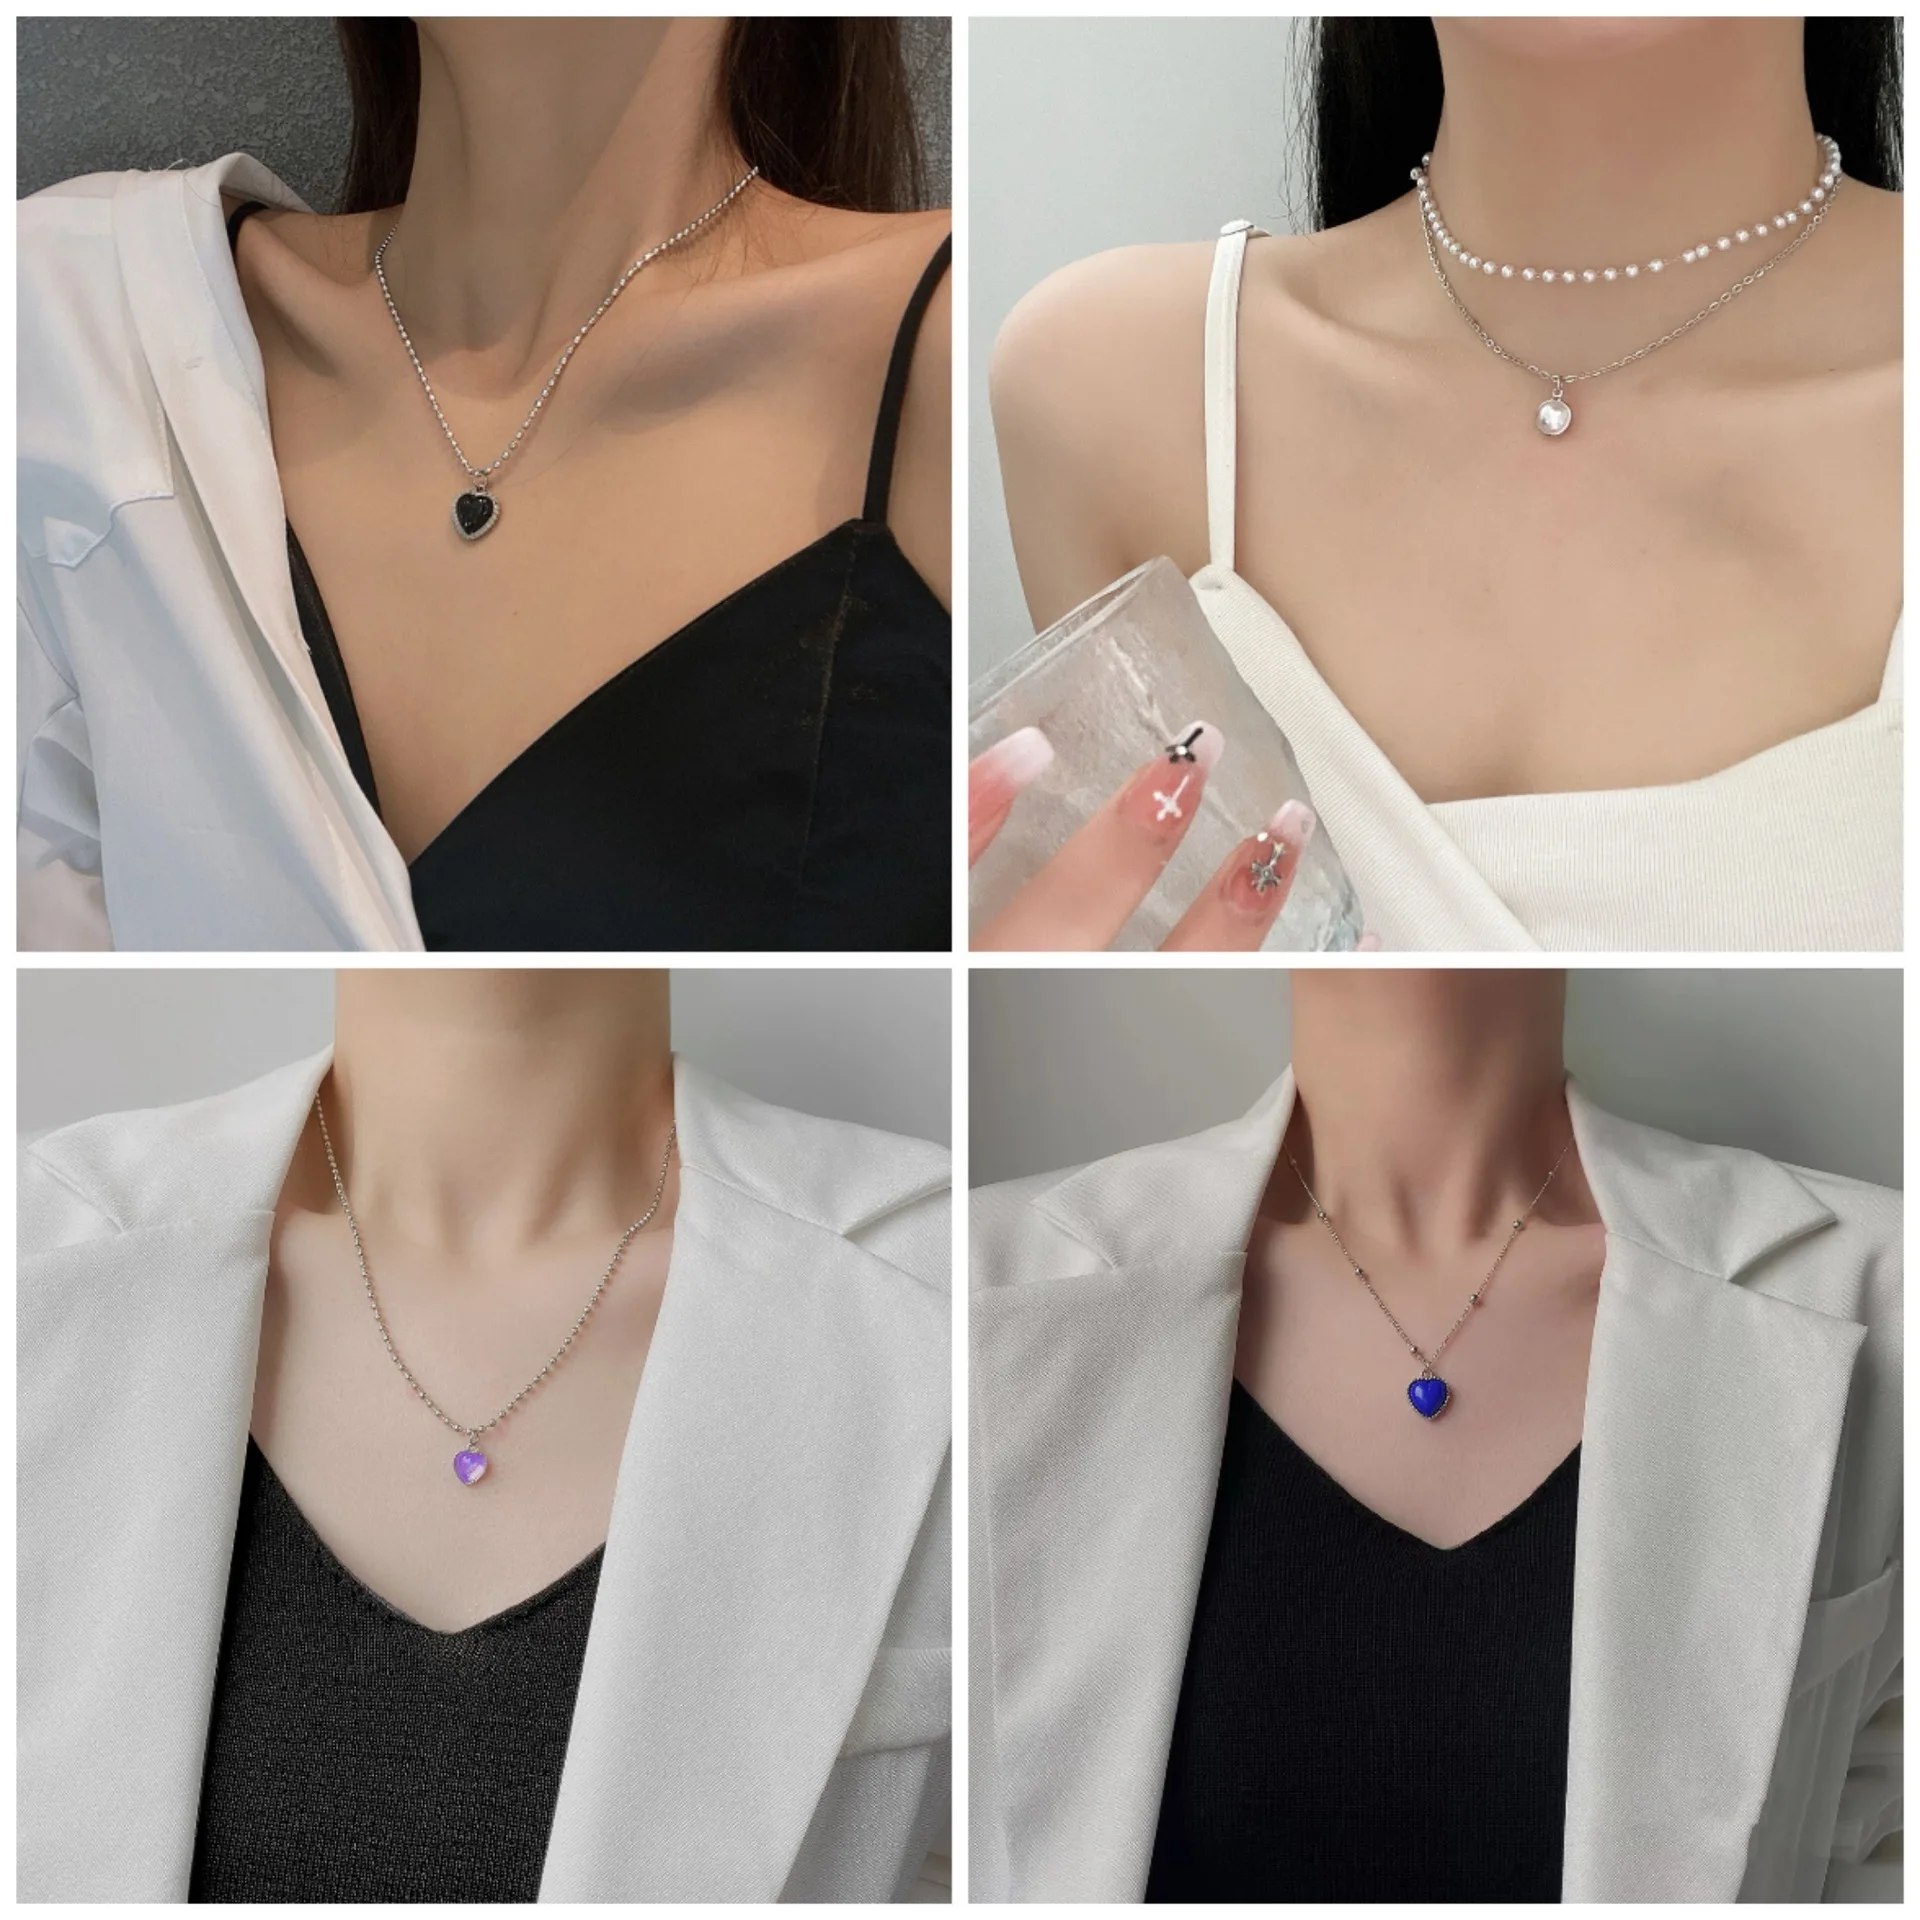 

Kpop Black Heart Necklace French Metal Love Clavicle Chain Korean Simple Female Short Pendanklace Female Short Pendant for Women